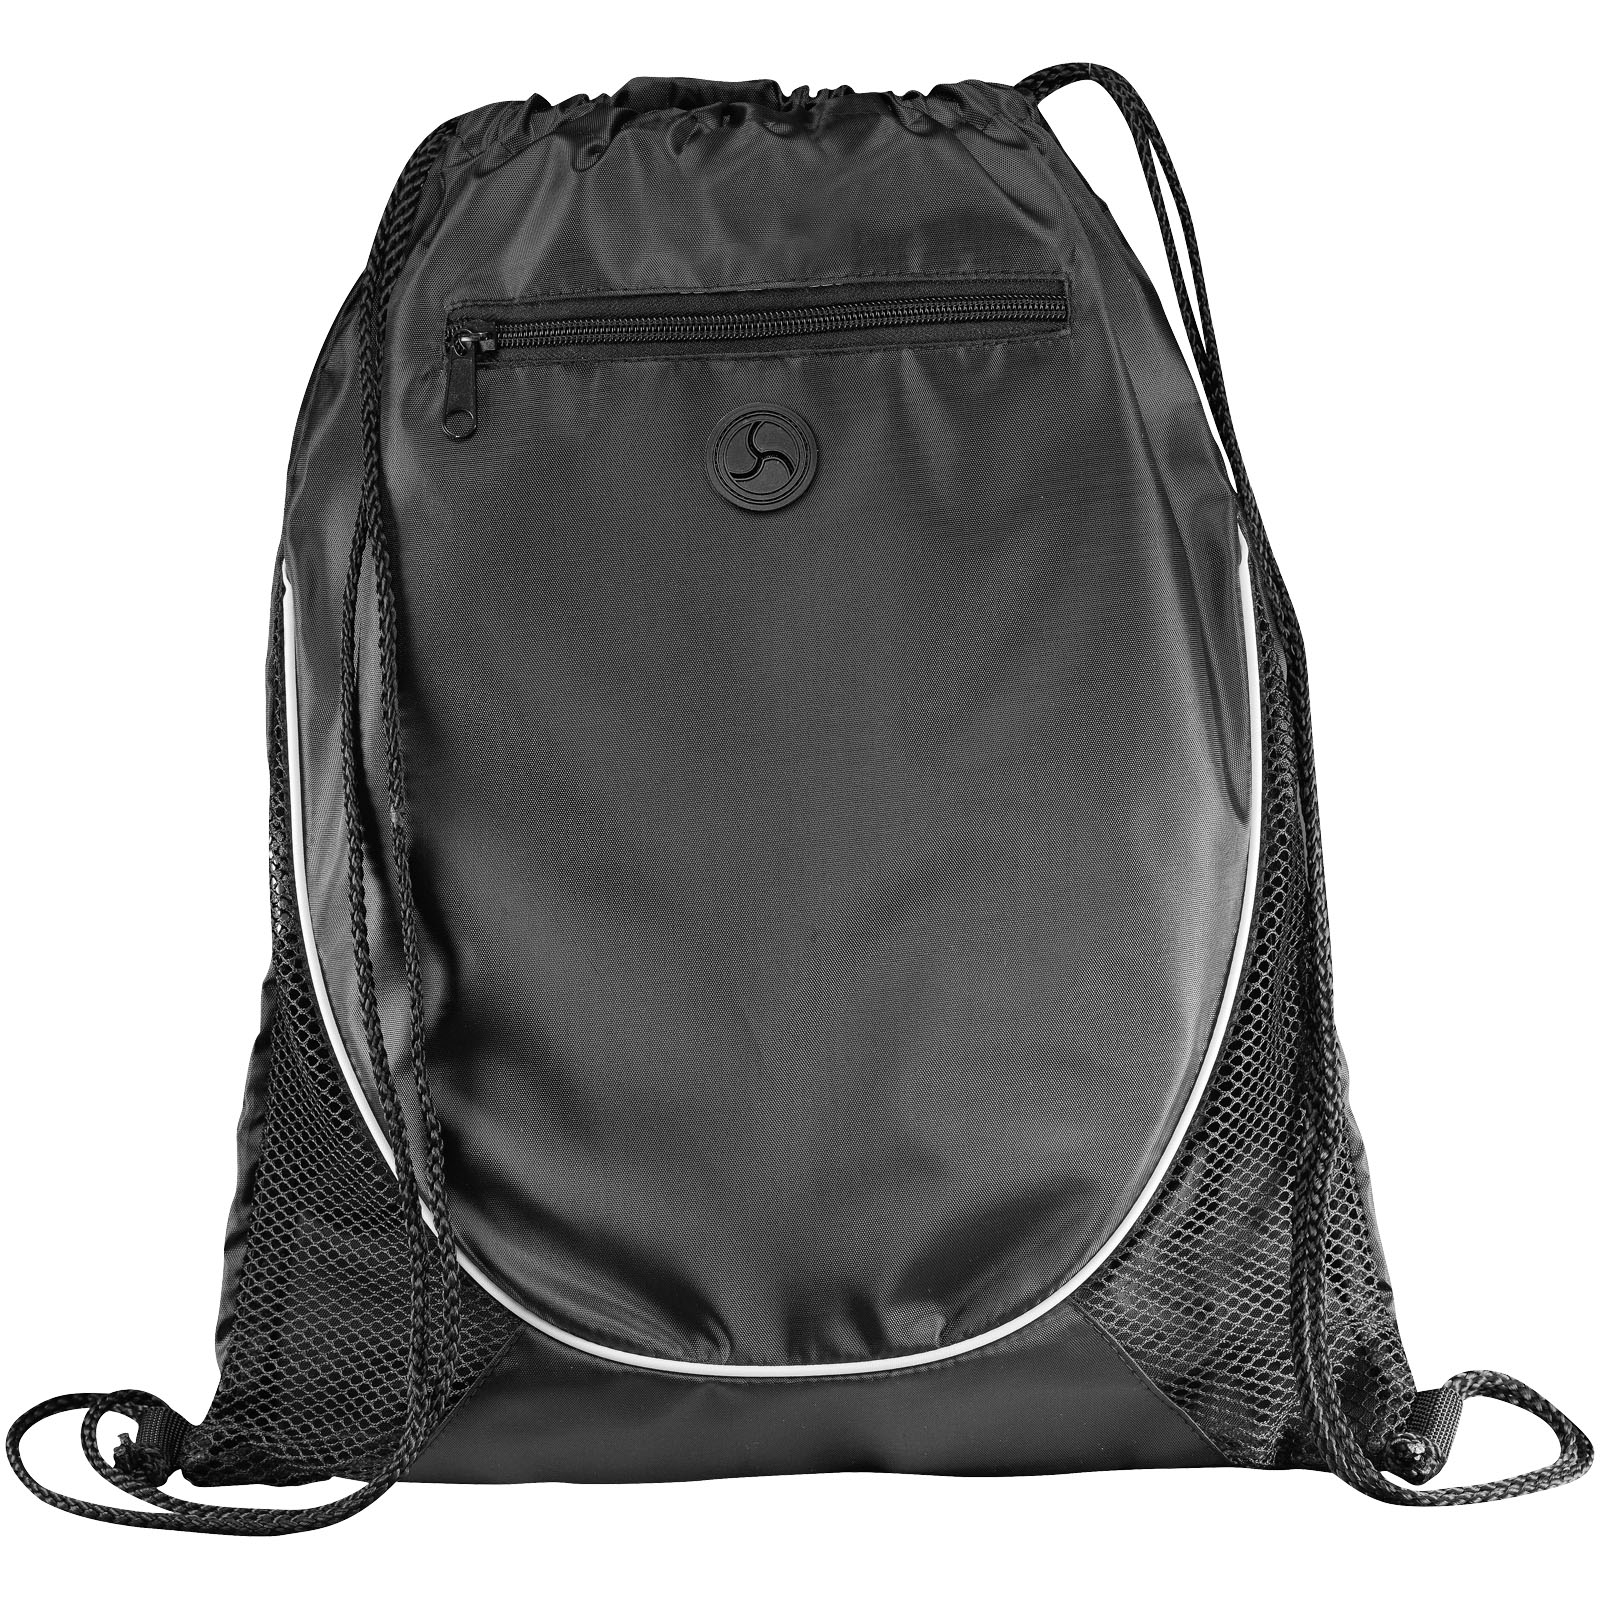 A backpack featuring a drawstring closure and a zippered pocket - Little Witley - Achnacarry